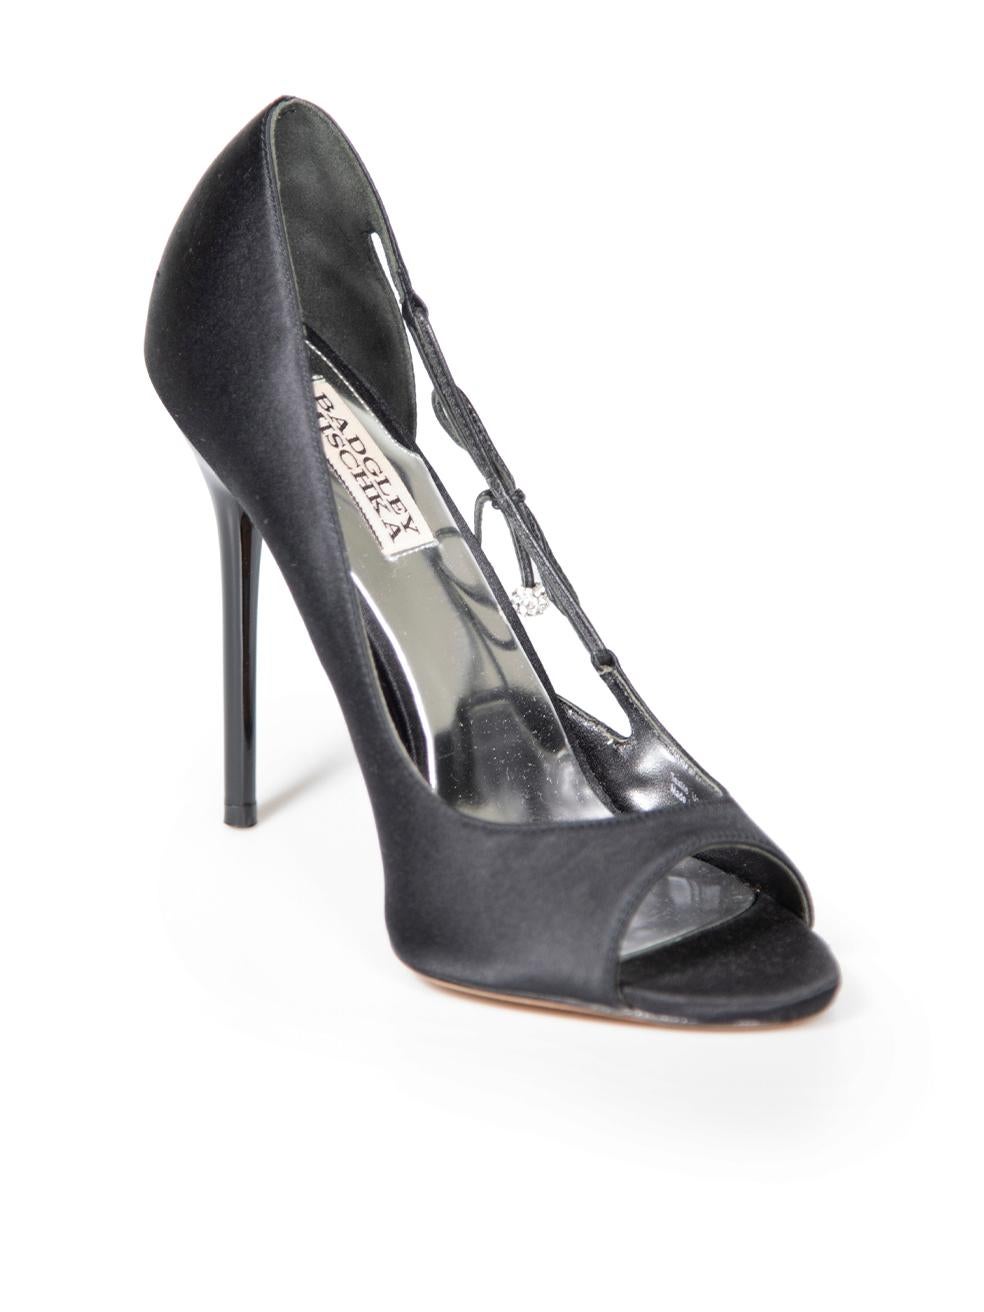 CONDITION is Very good. Minimal wear to heels is evident. Minimal wear to back left heel with small abrasion to the satin on this used Badgley Mischka designer resale item. Comes with original dust bag.
 
 
 
 Details
 
 
 Black
 
 Satin
 
 Slip on